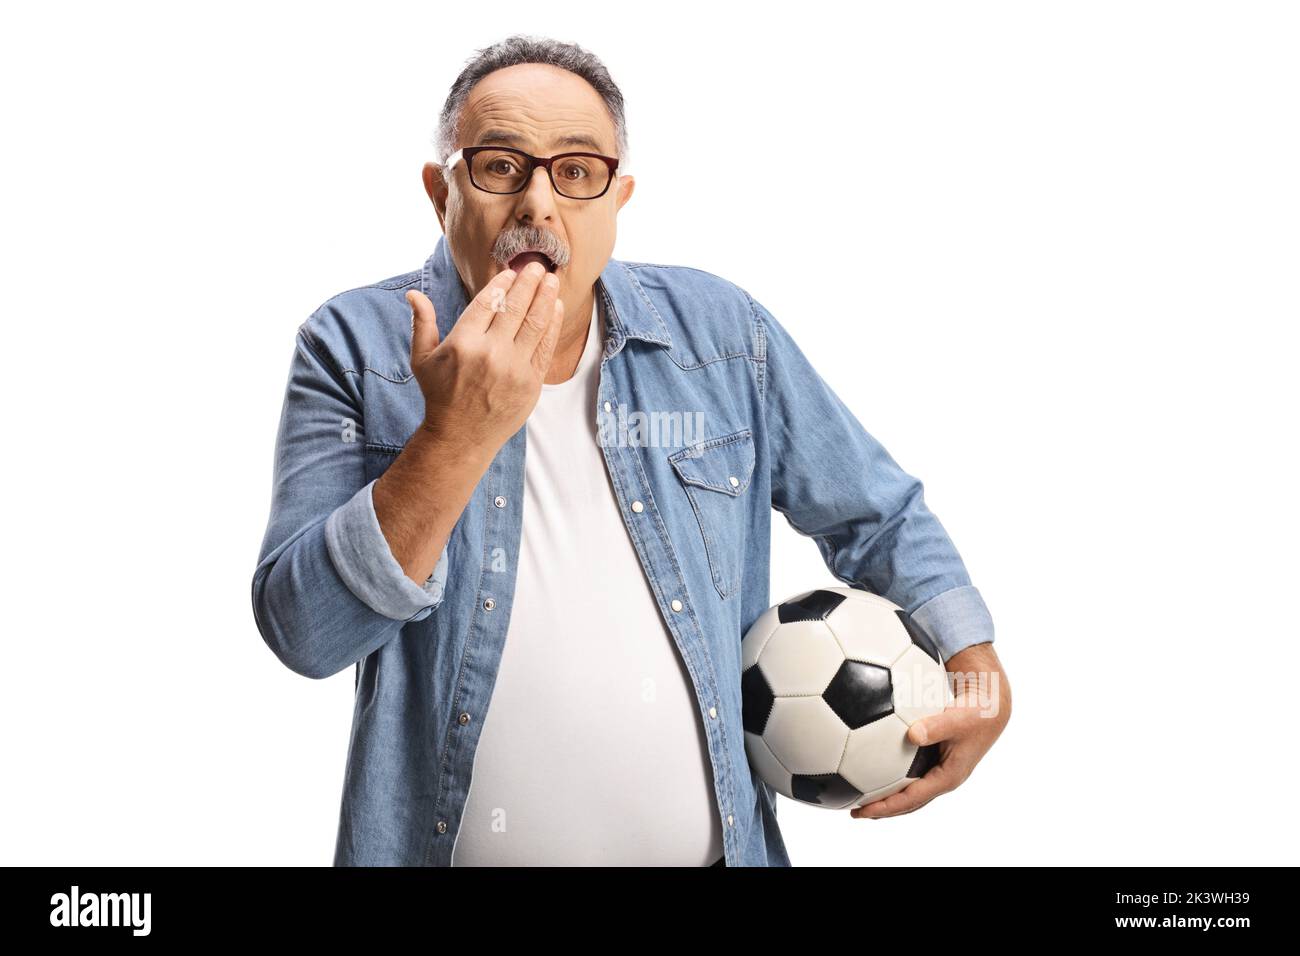 Shocked mature man holding a football and covering his mouth isolated on white background Stock Photo